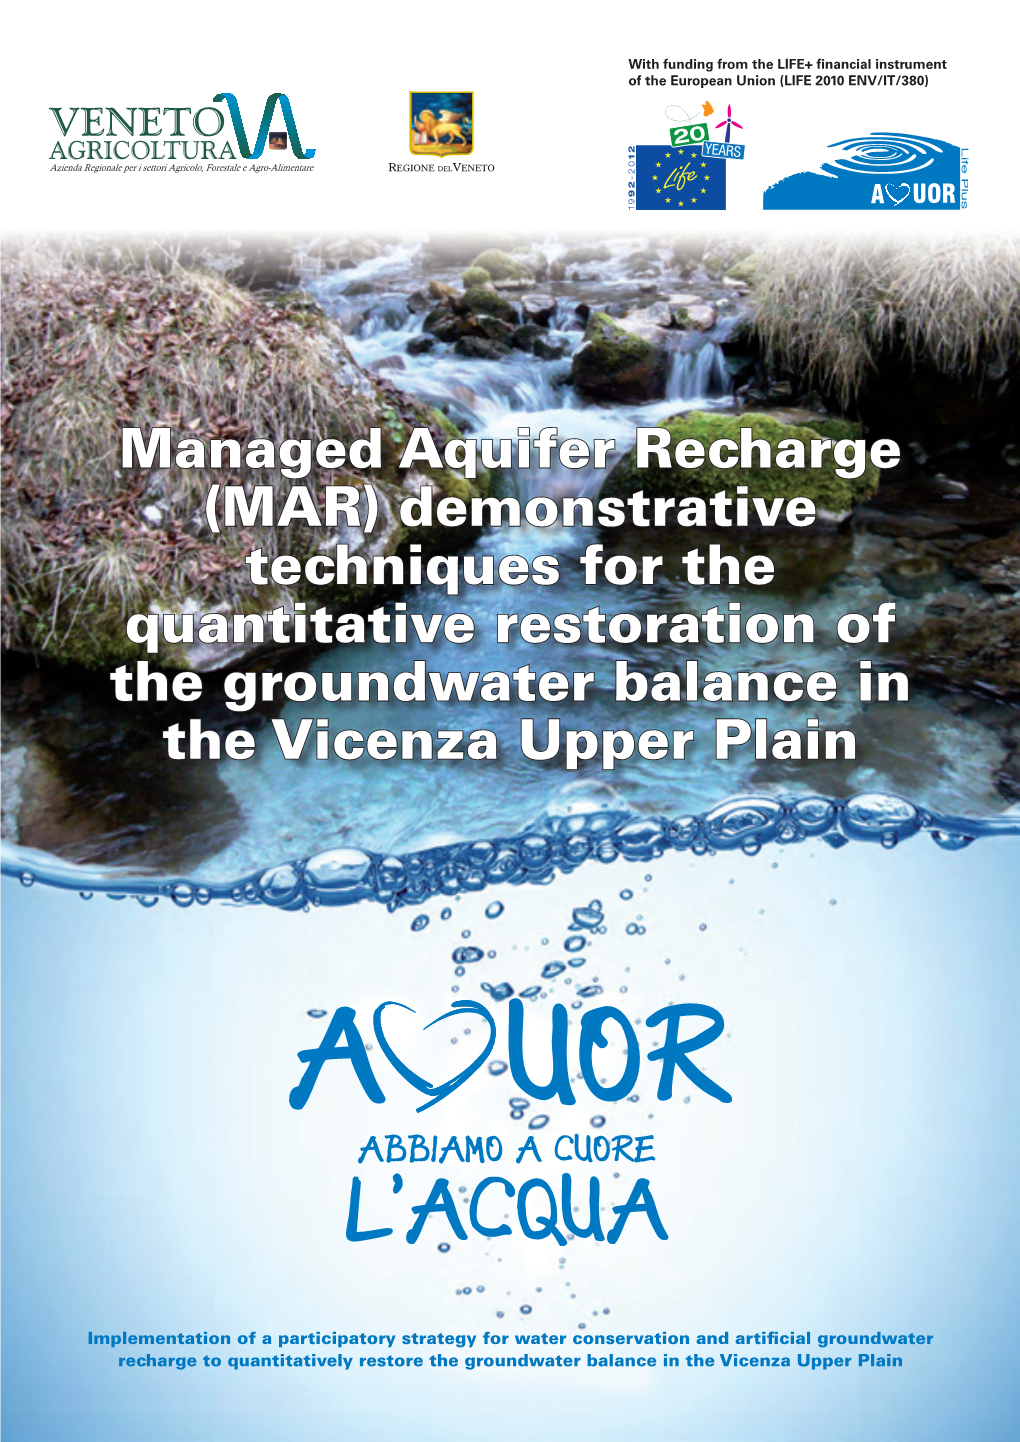 Managed Aquifer Recharge (MAR) Demonstrative Techniques for the Quantitative Restoration of the Groundwater Balance in the Vicenza Upper Plain